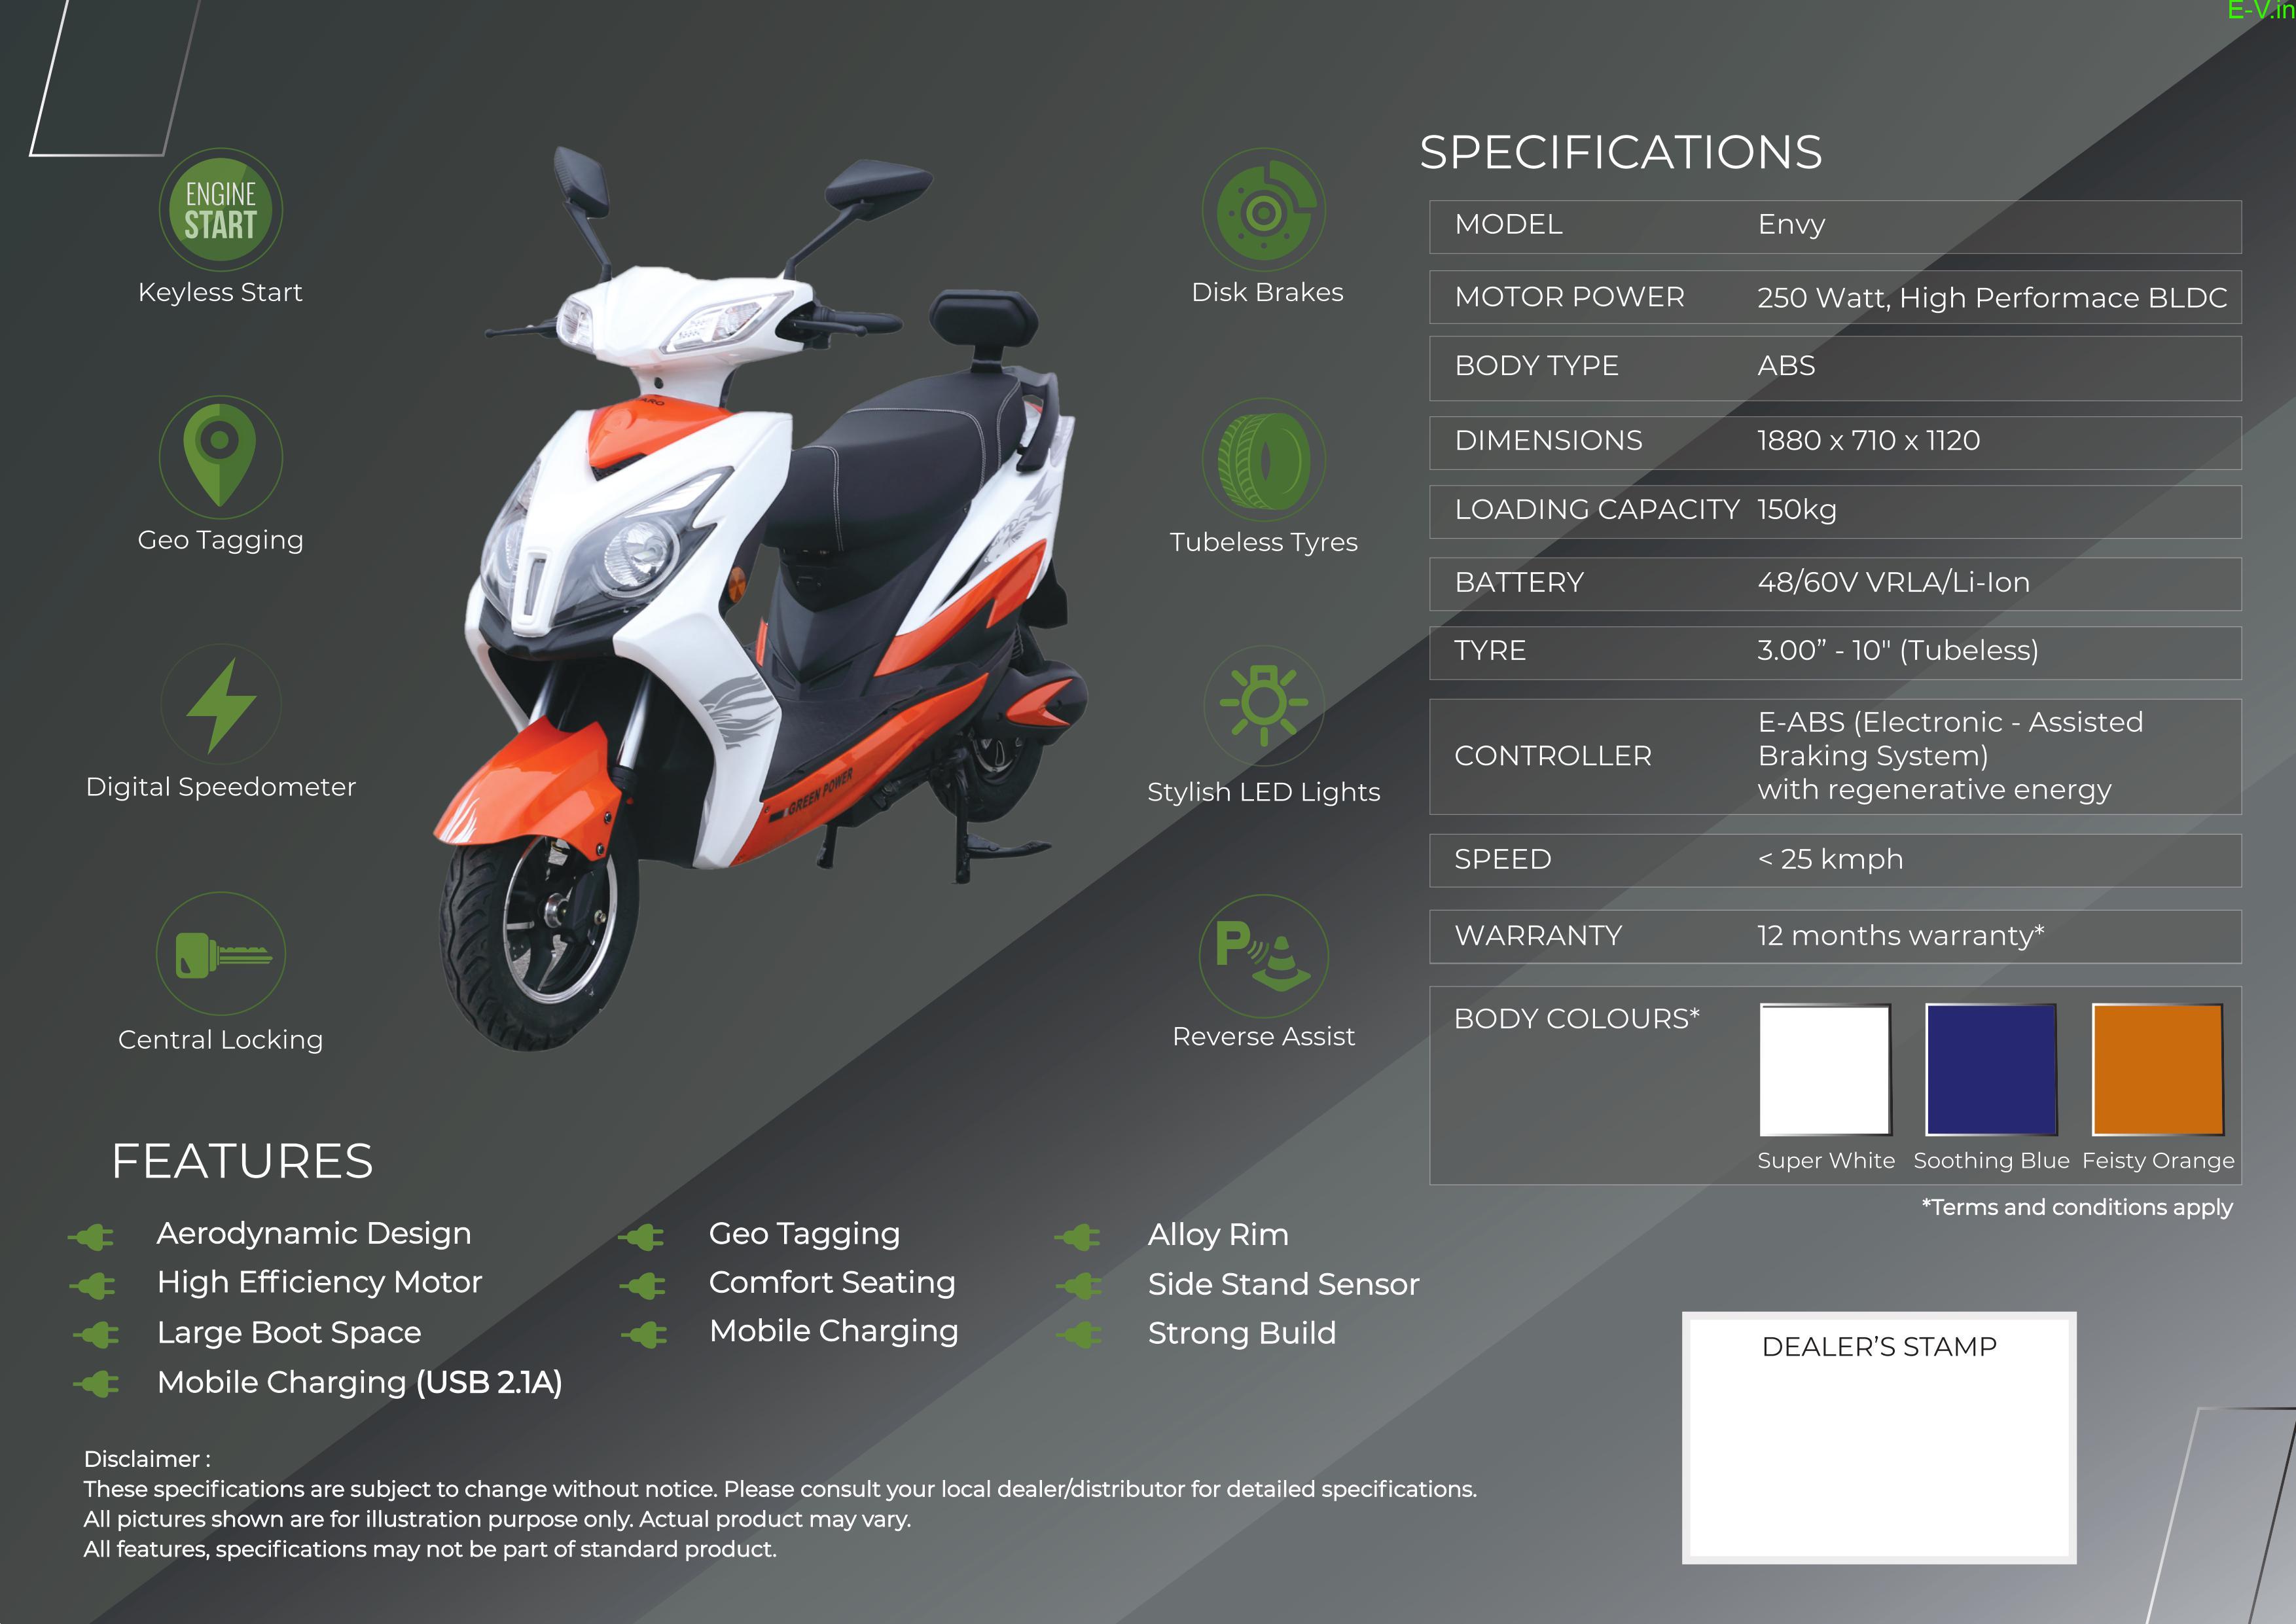 Go Green with Envy Electric Scooter India's best electric vehicles